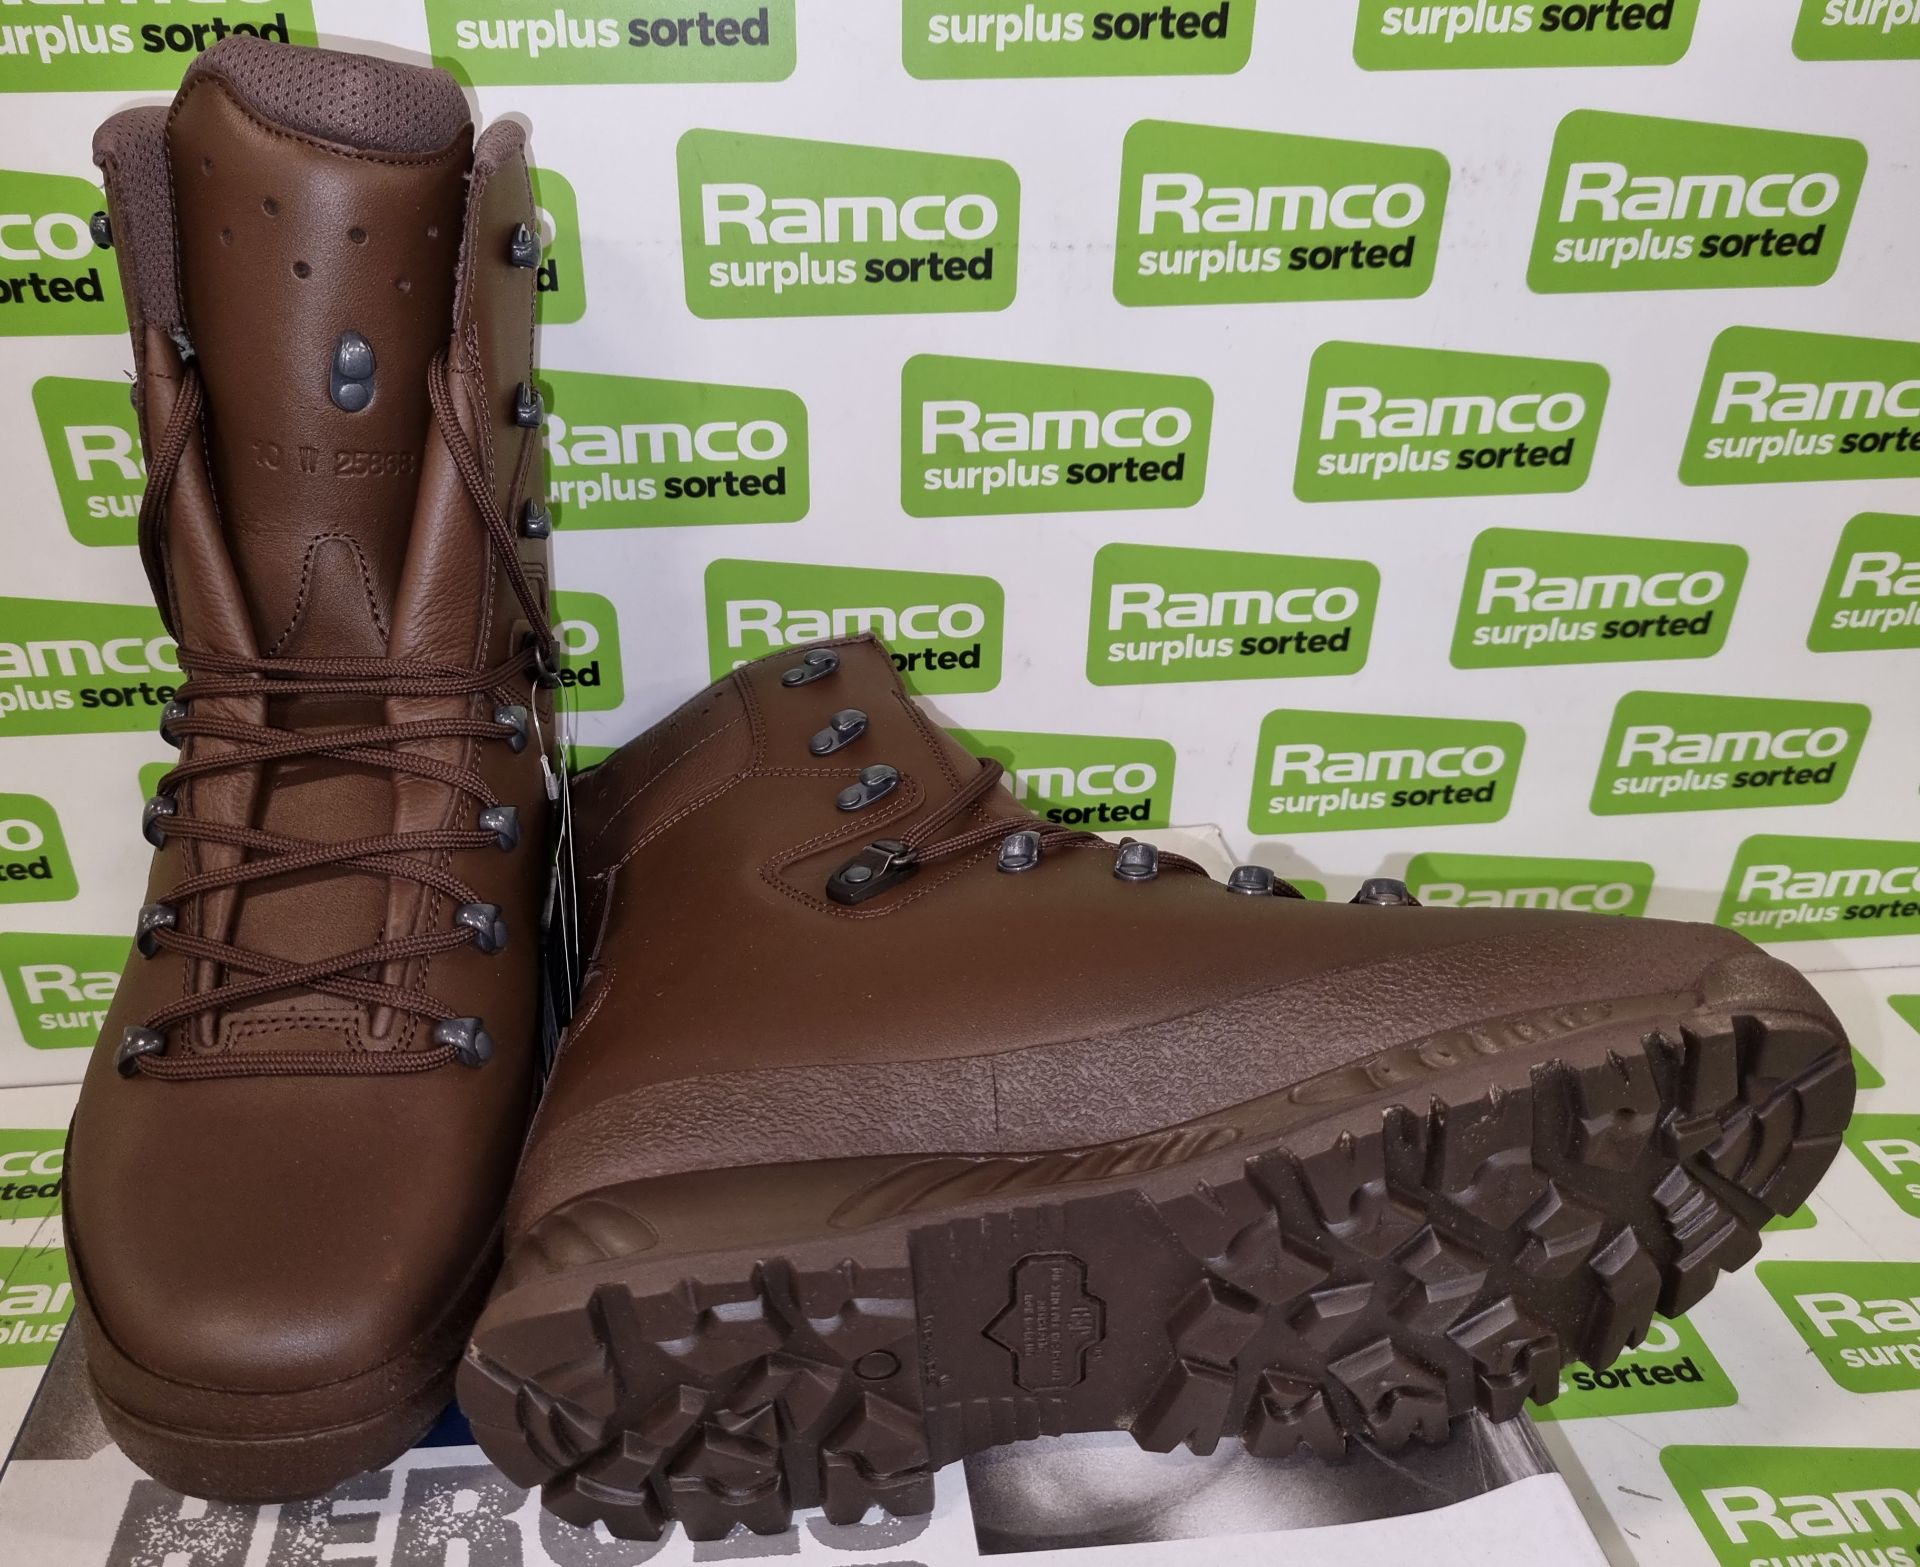 19x pairs of Haix cold wet weather boots - Size 10W - Image 2 of 4